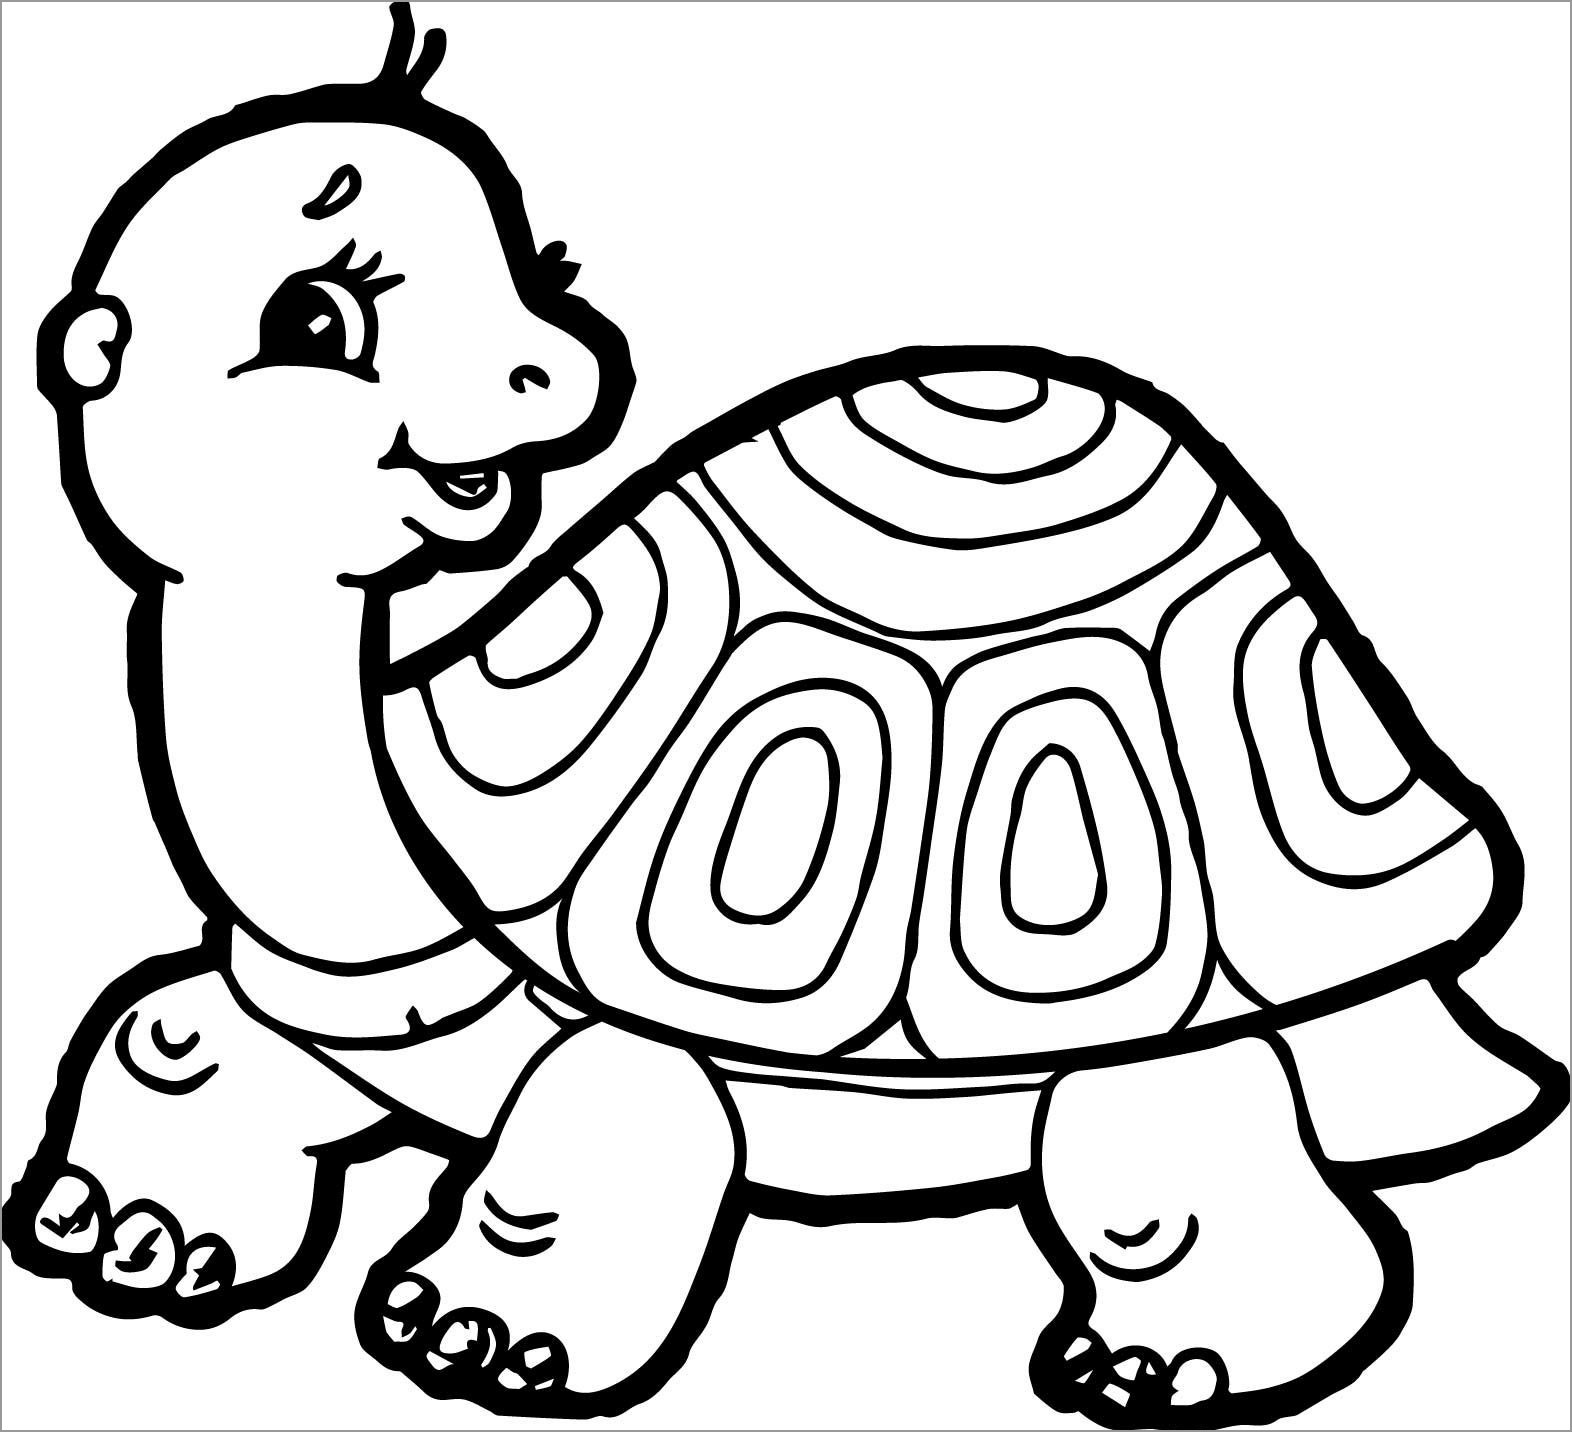 Tortoise Coloring Pages - ColoringBay